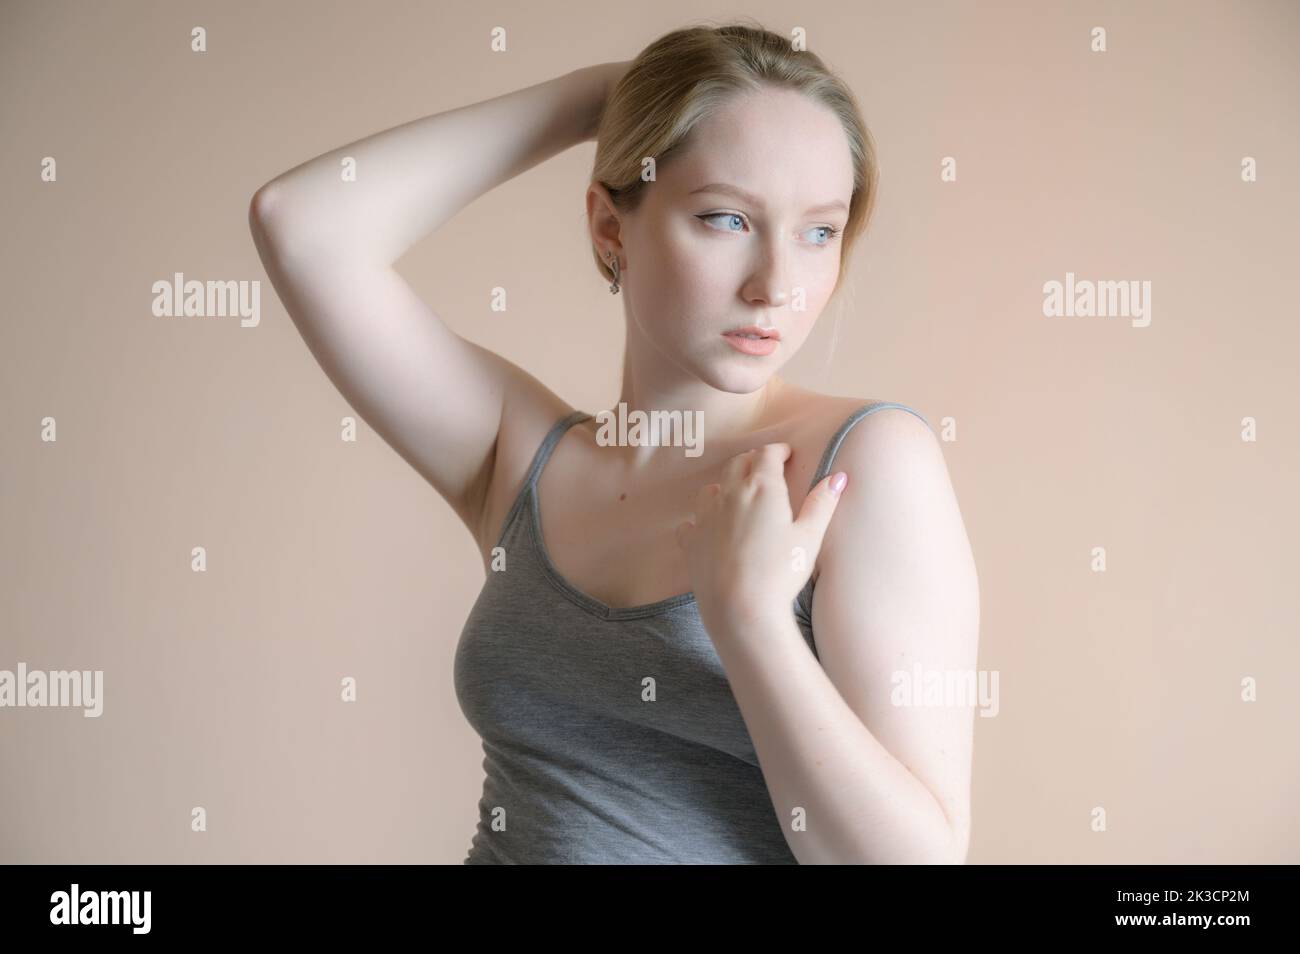 Graceful young woman posing against beige wall. Stock Photo